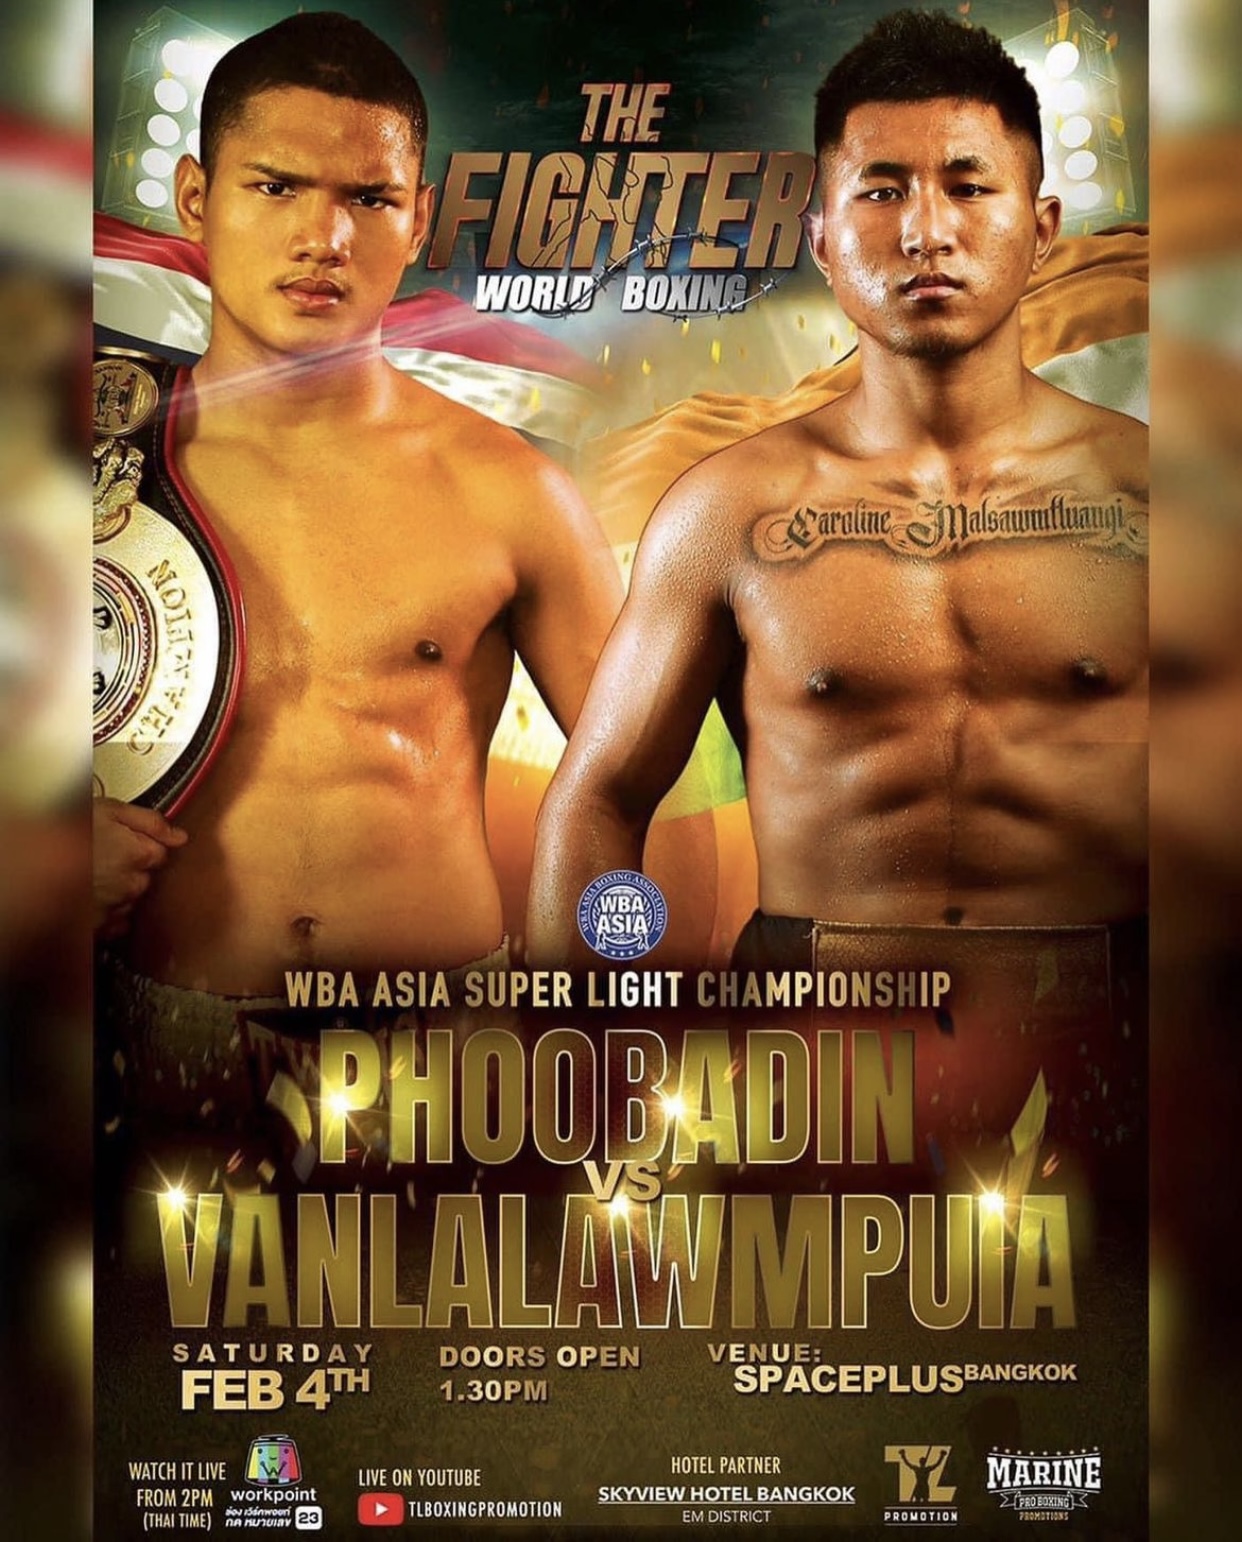 Yoohhanngoh will defend his WBA-Asia crown for the sixth time against Vanlalawmpuia